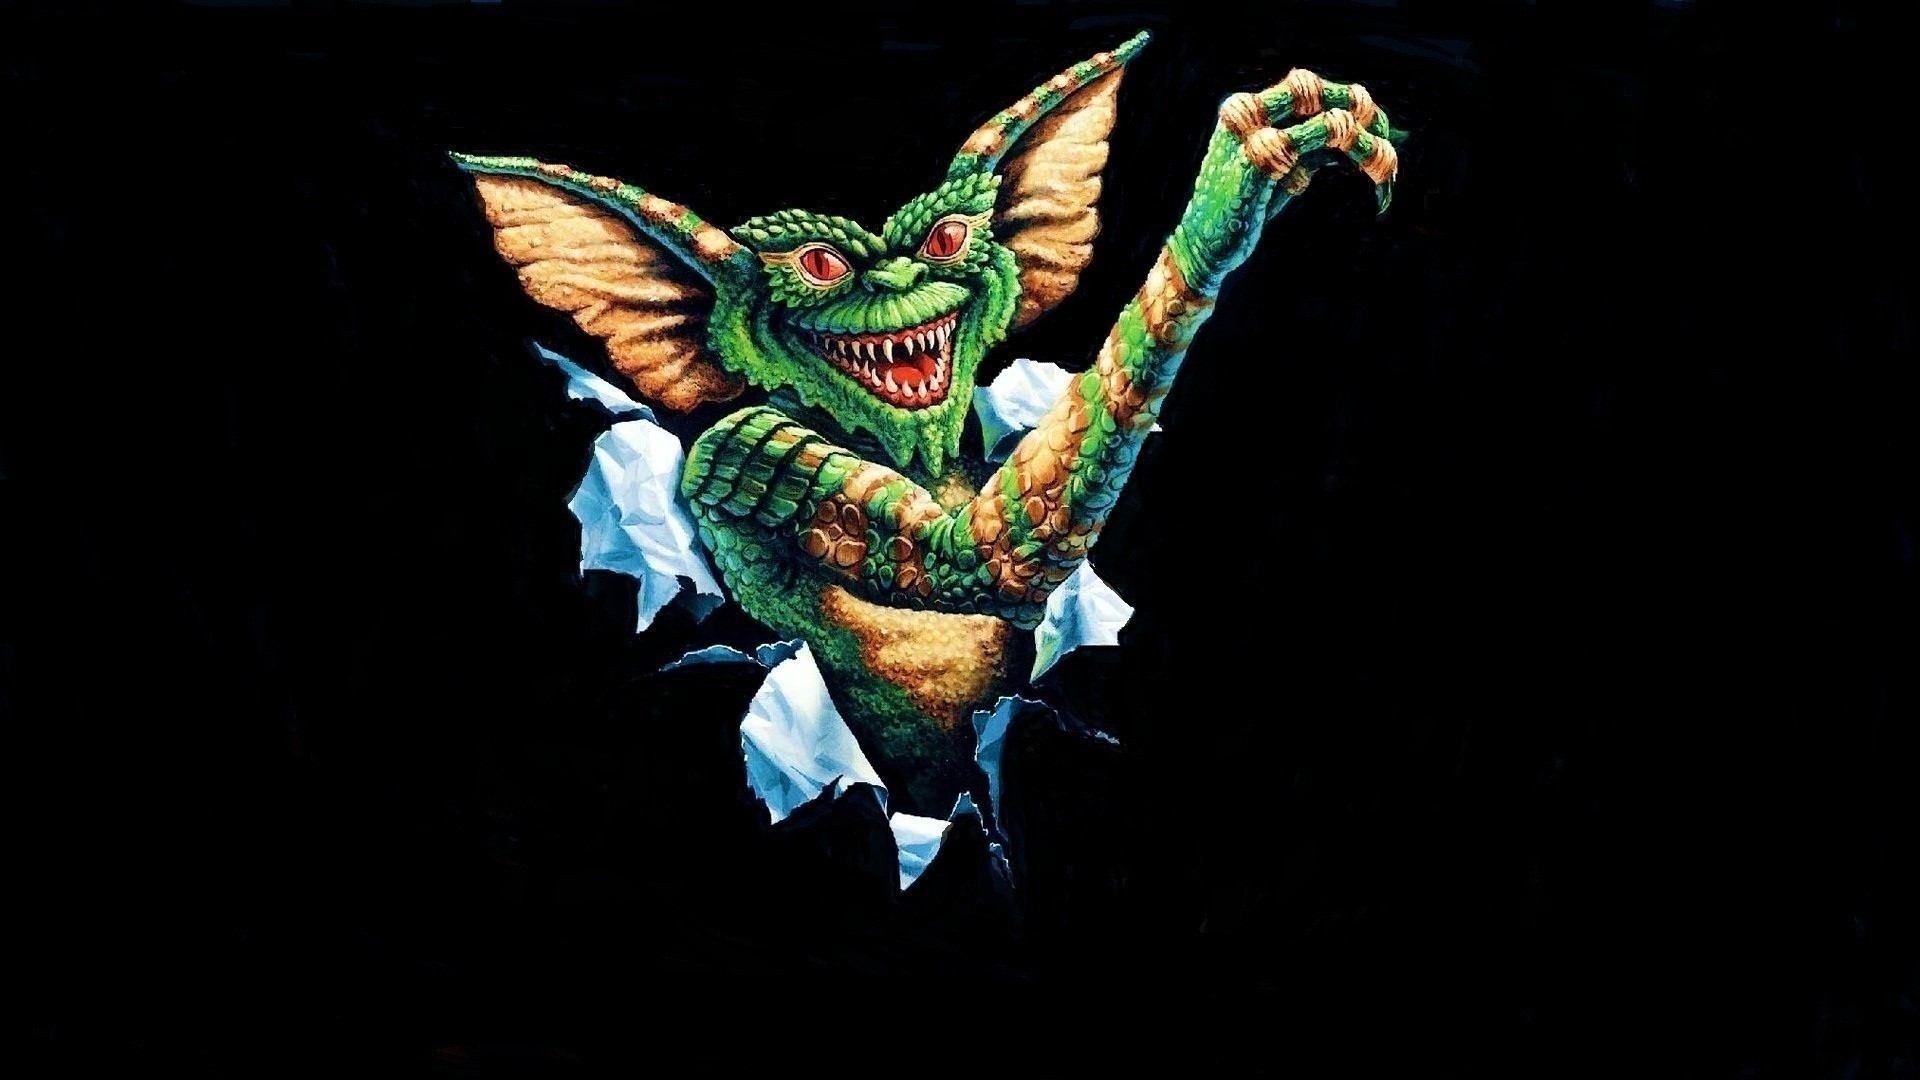 Movie Gremlins 2: The New Batch HD Wallpaper | Background Image